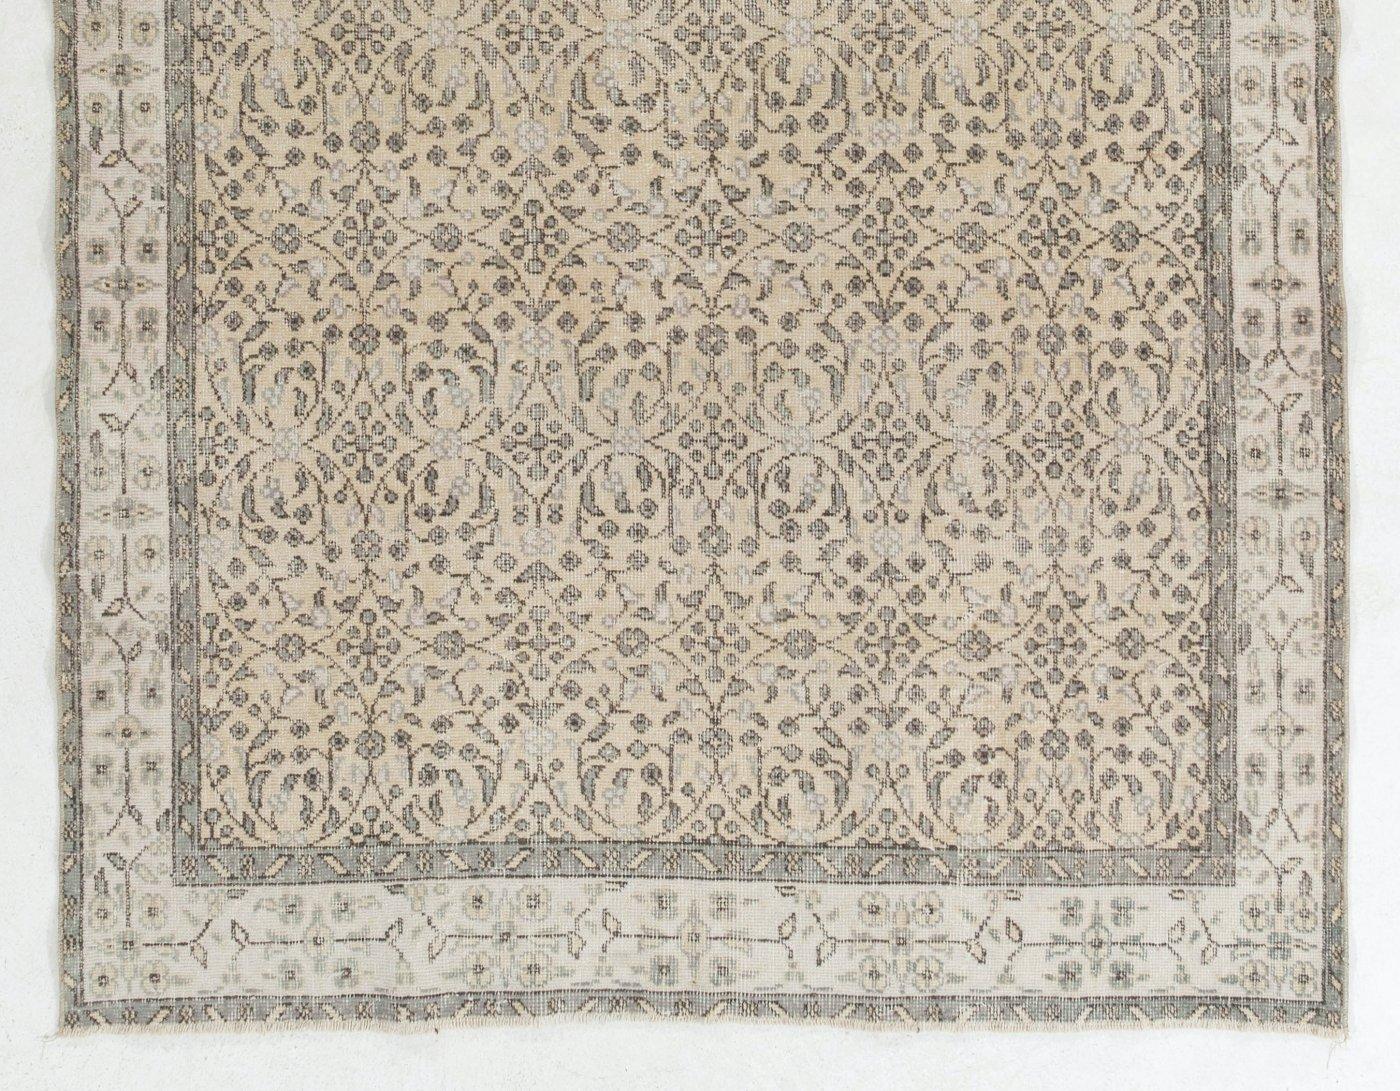 Hand-Woven Floral Vintage Handmade Turkish Oushak Wool Rug in Soft Colors